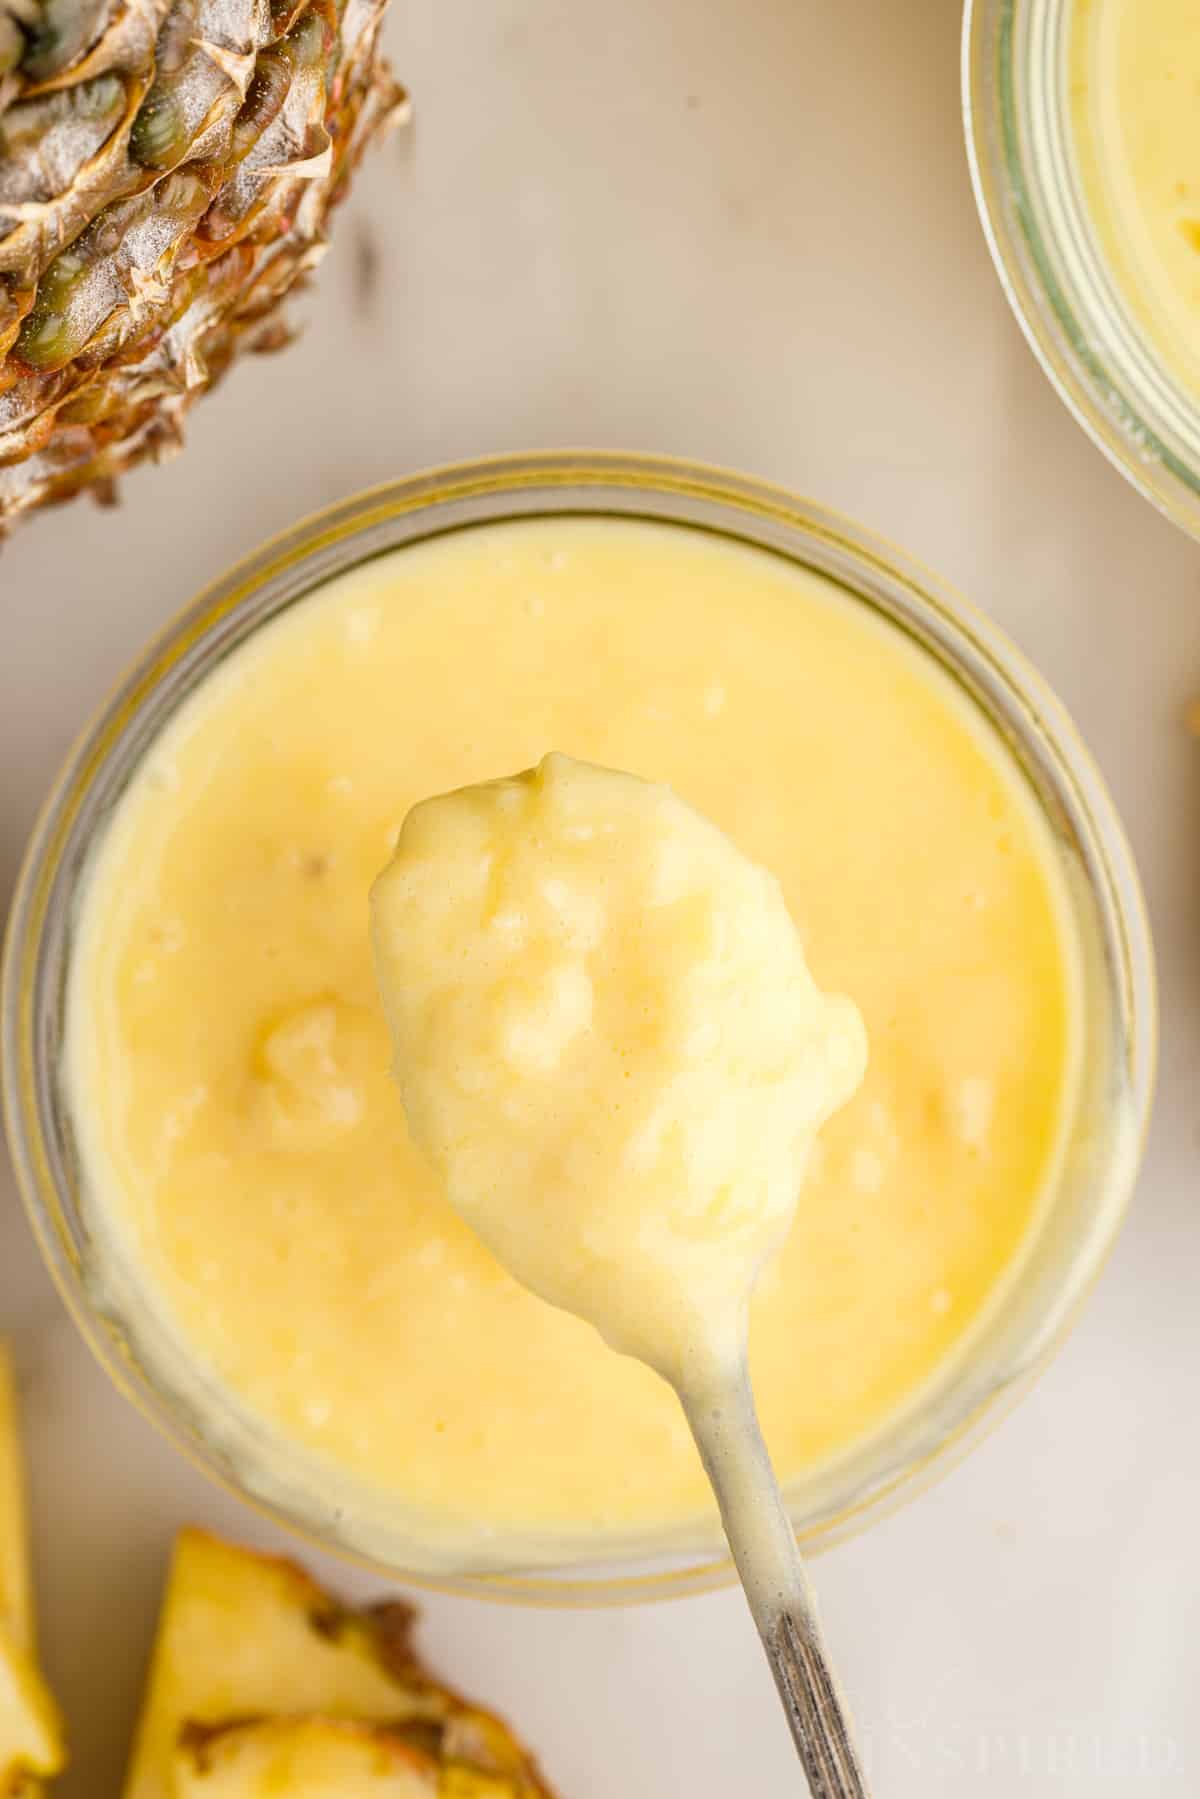 Pineapple Curd on a spoon over a dish of it.